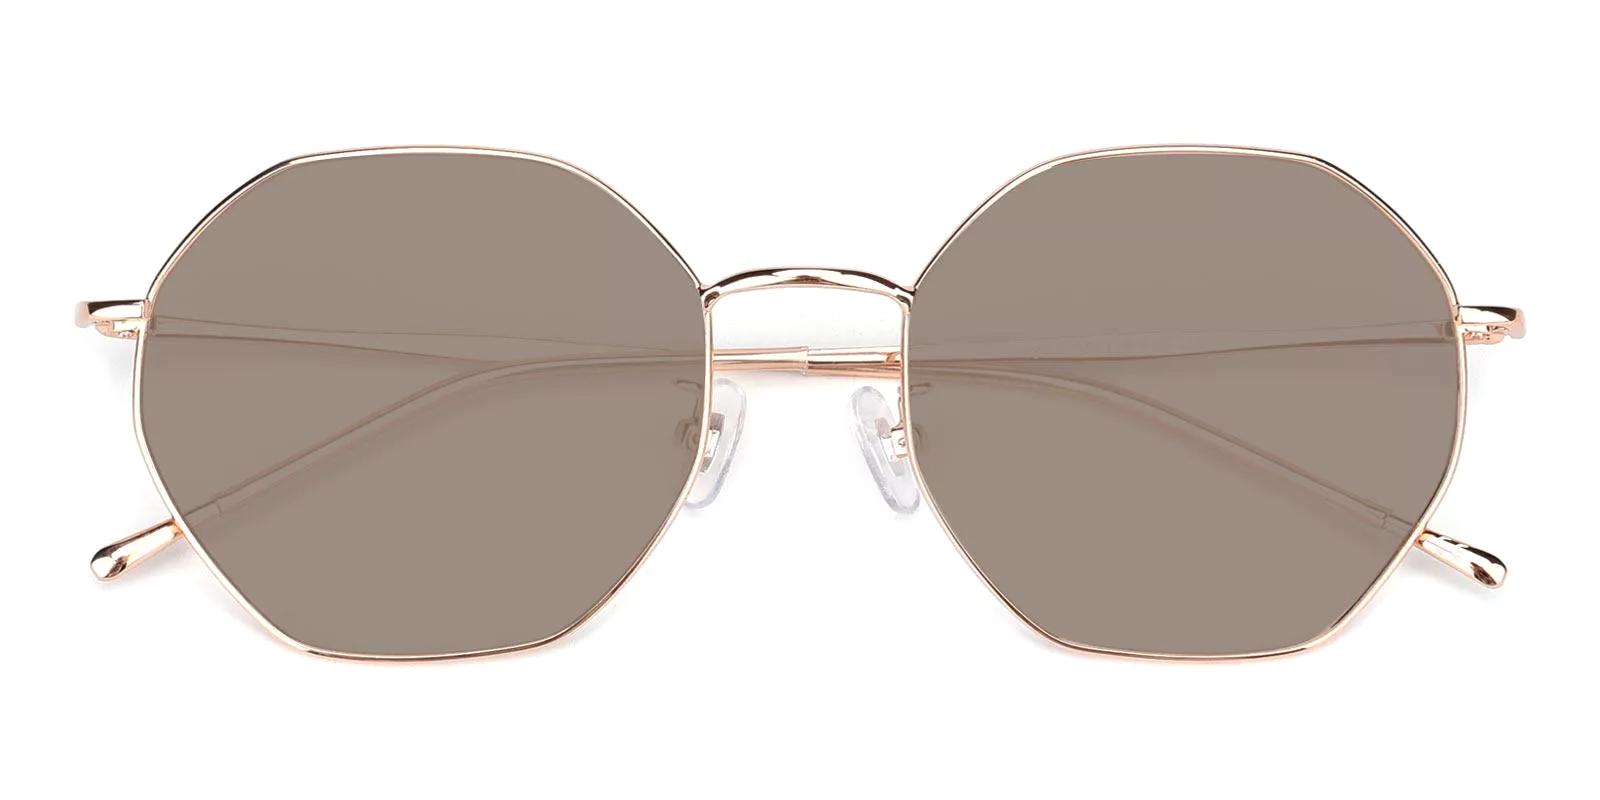 Sarcile Rosegold Metal NosePads , Sunglasses Frames from ABBE Glasses